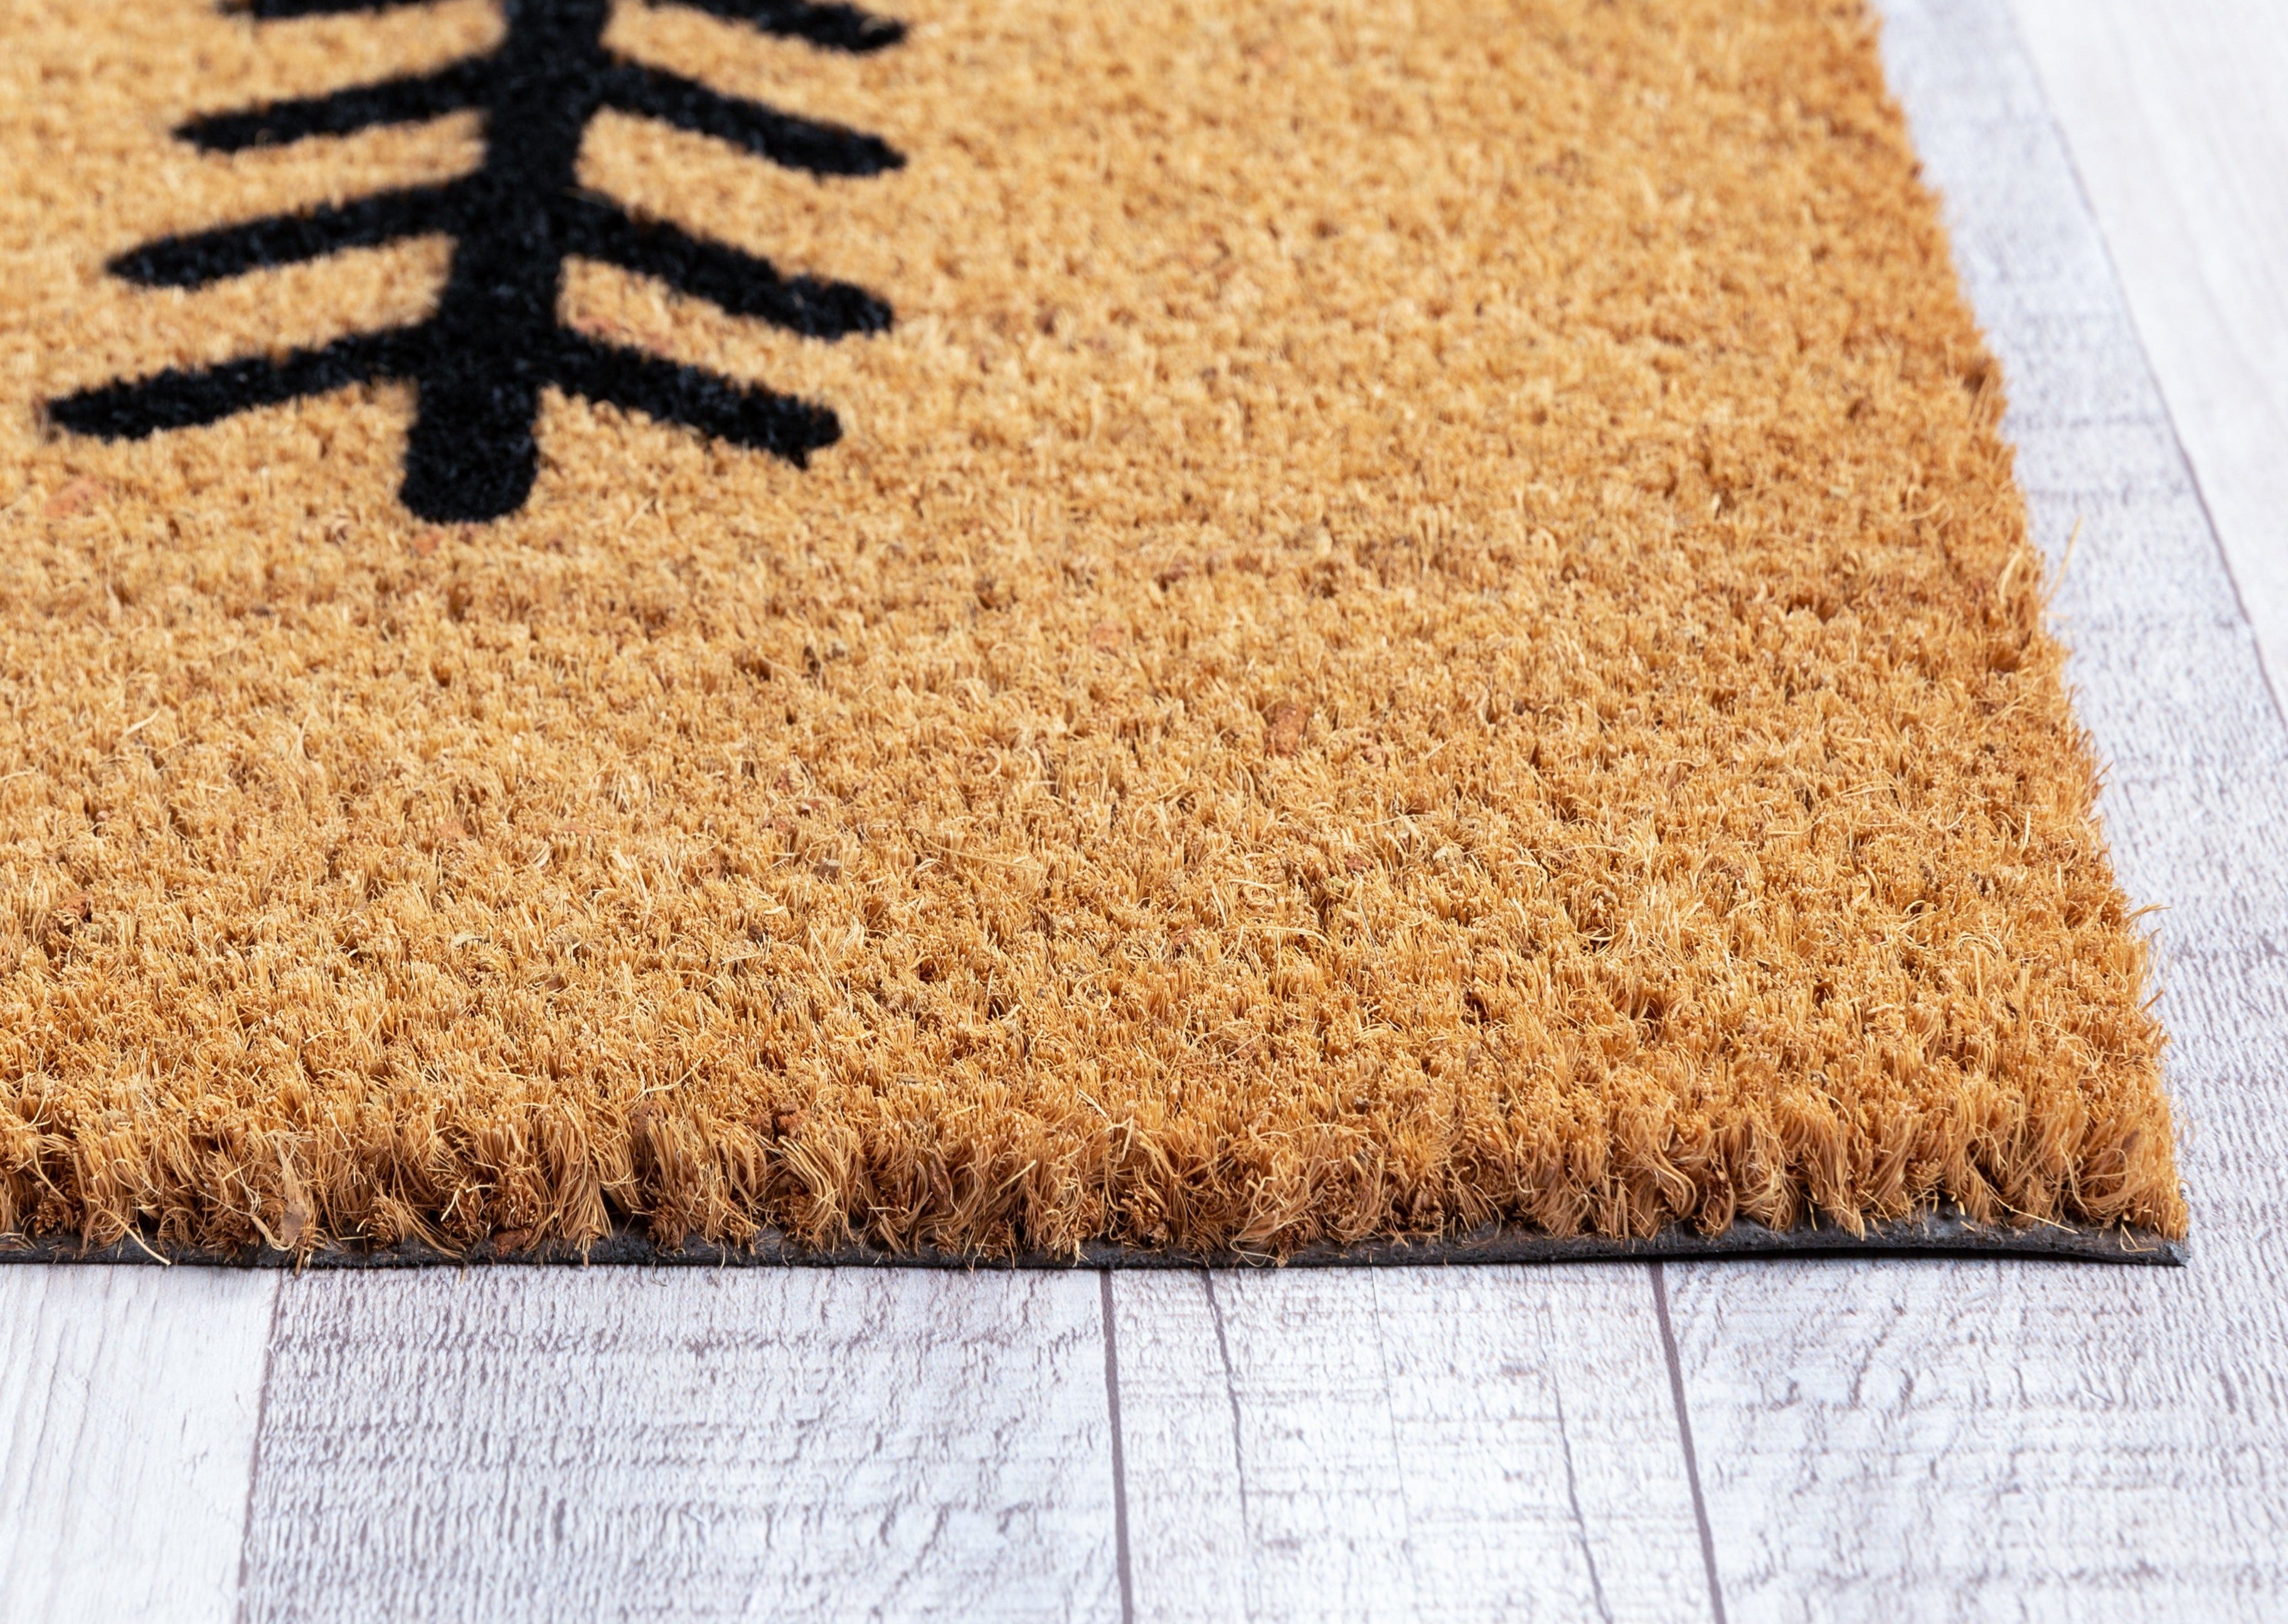 Winter Tree Line Black and Natural Holiday Doormat 18x30 + Reviews